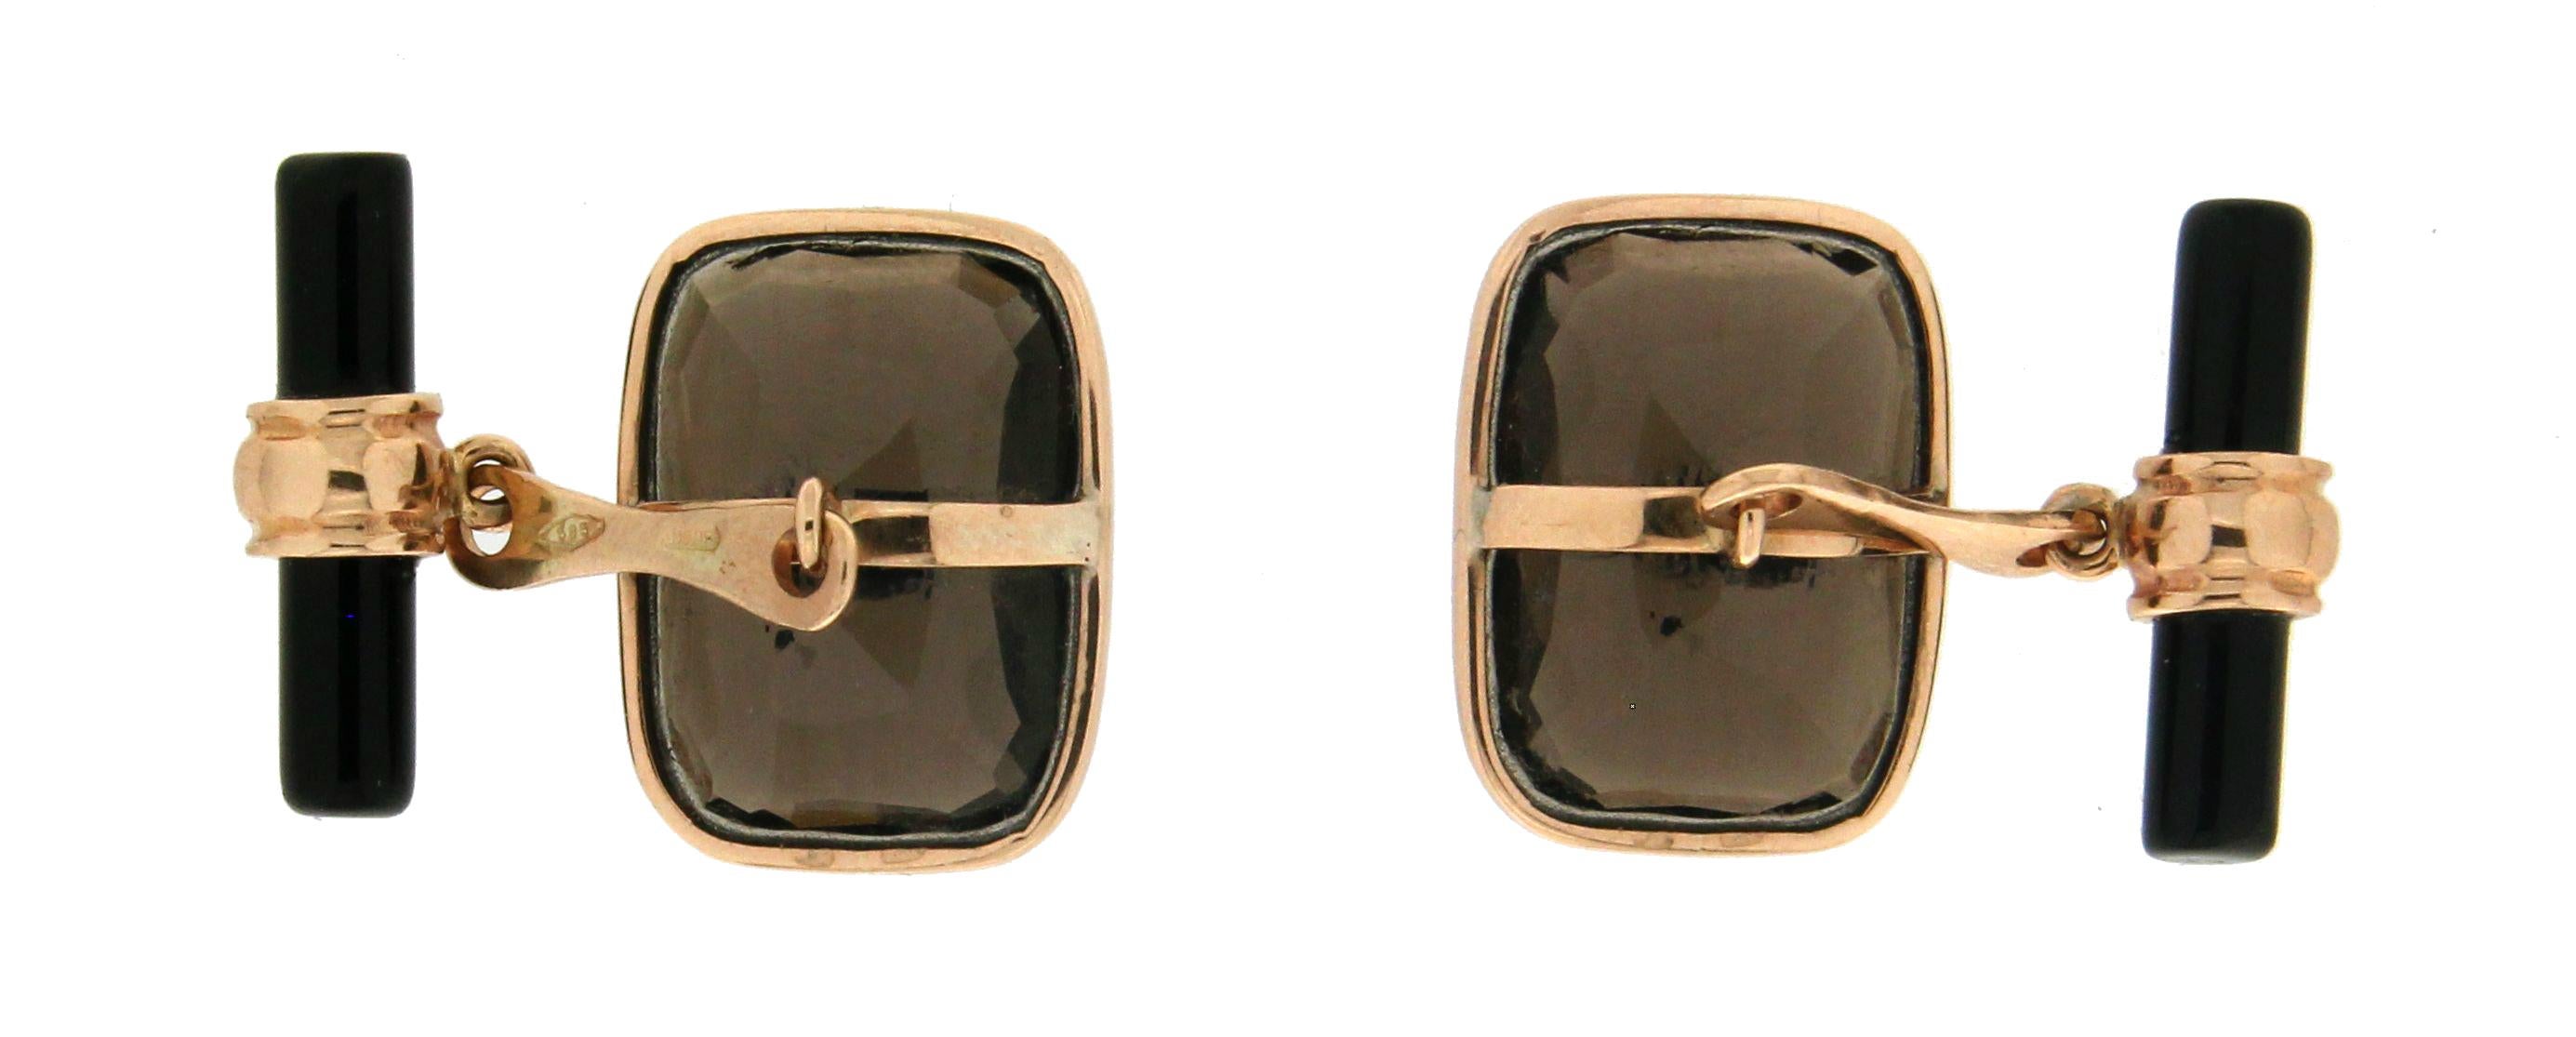 14 Karat yellow gold cufflinks. Handmade by our craftsmen assembled with citrine and onyx barrels.

Citrine weight 3.80 grams
Cufflinks total weight 10 grams